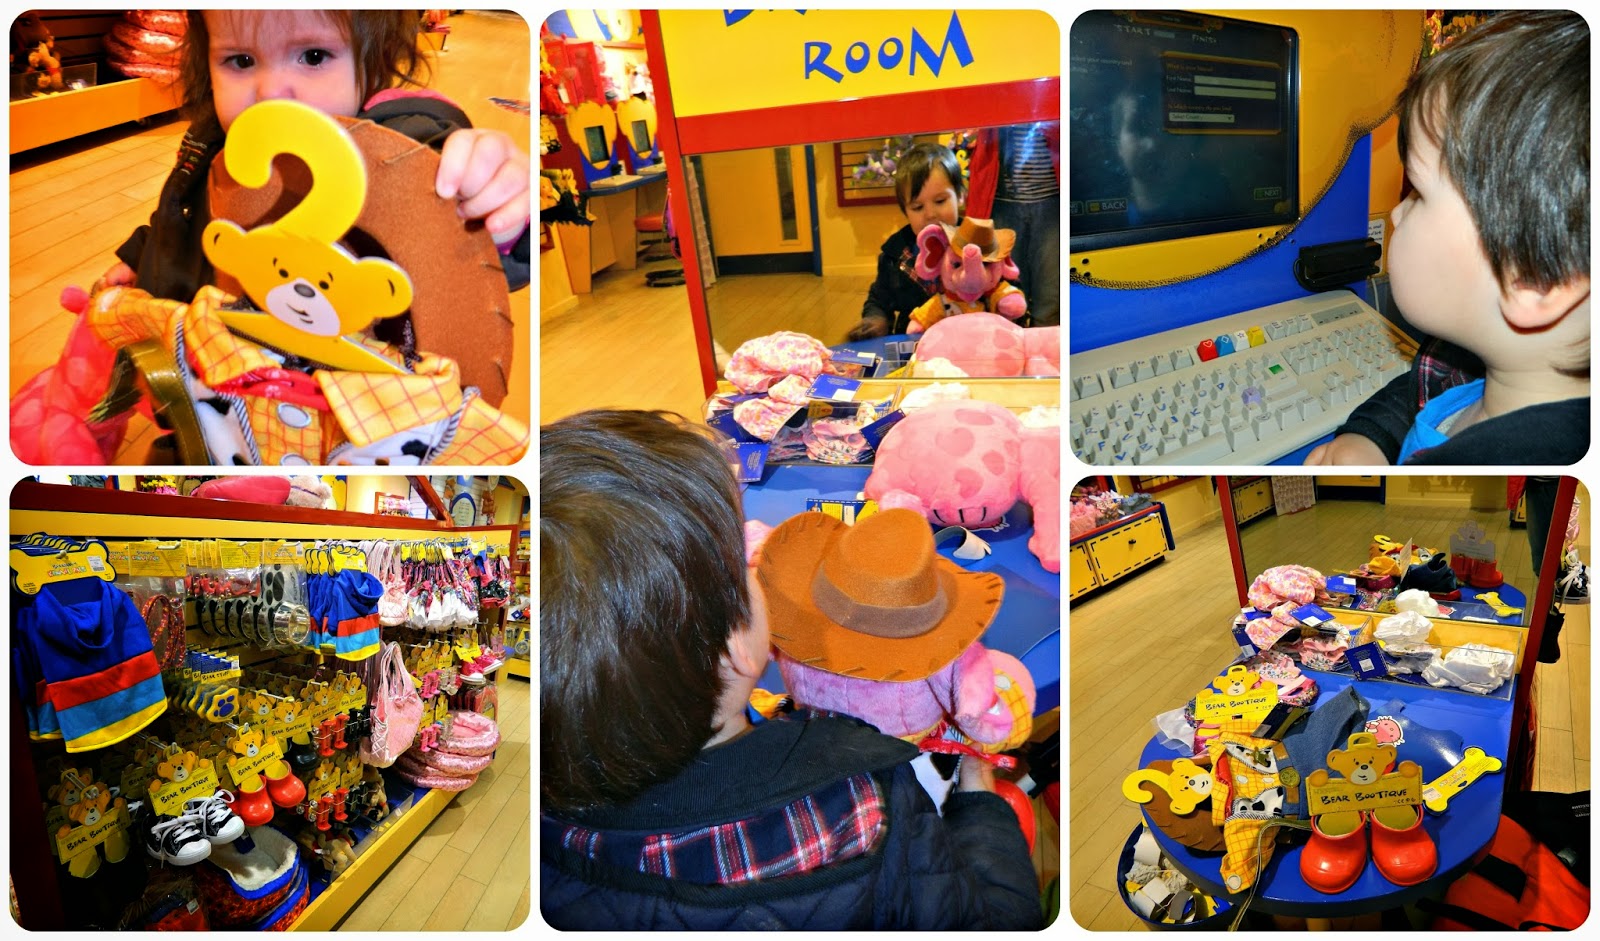 Choosing clothes and accessories and registering our bears at Build a Bear Workshop